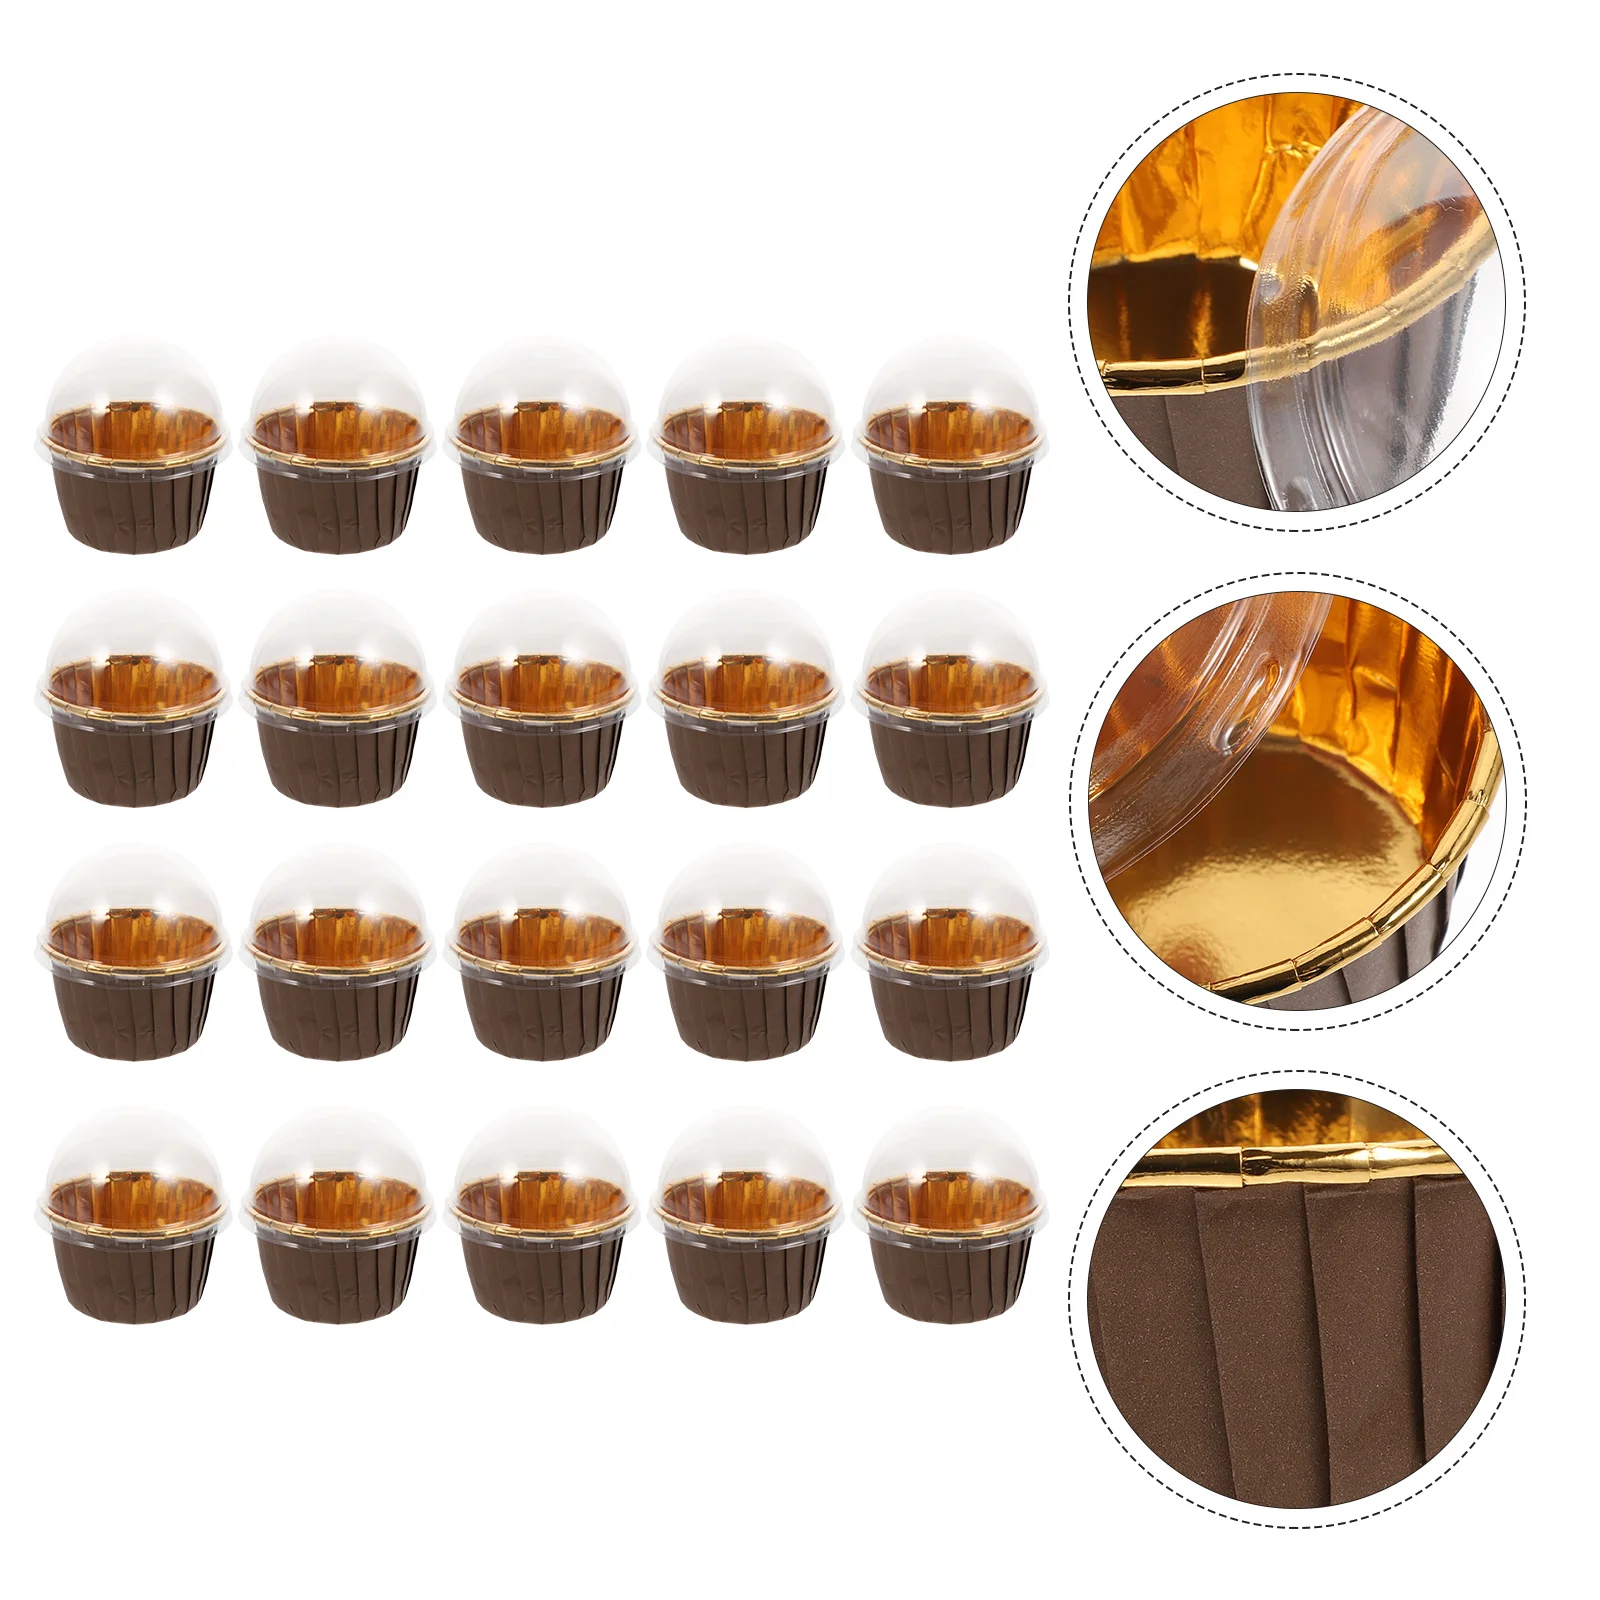 

Cupcake Cups Baking Muffin Liners Paper Cake Mini Cup Wrapper Cases Wrappers Lid Dome Crimping Holder Dessert Molds Parfait